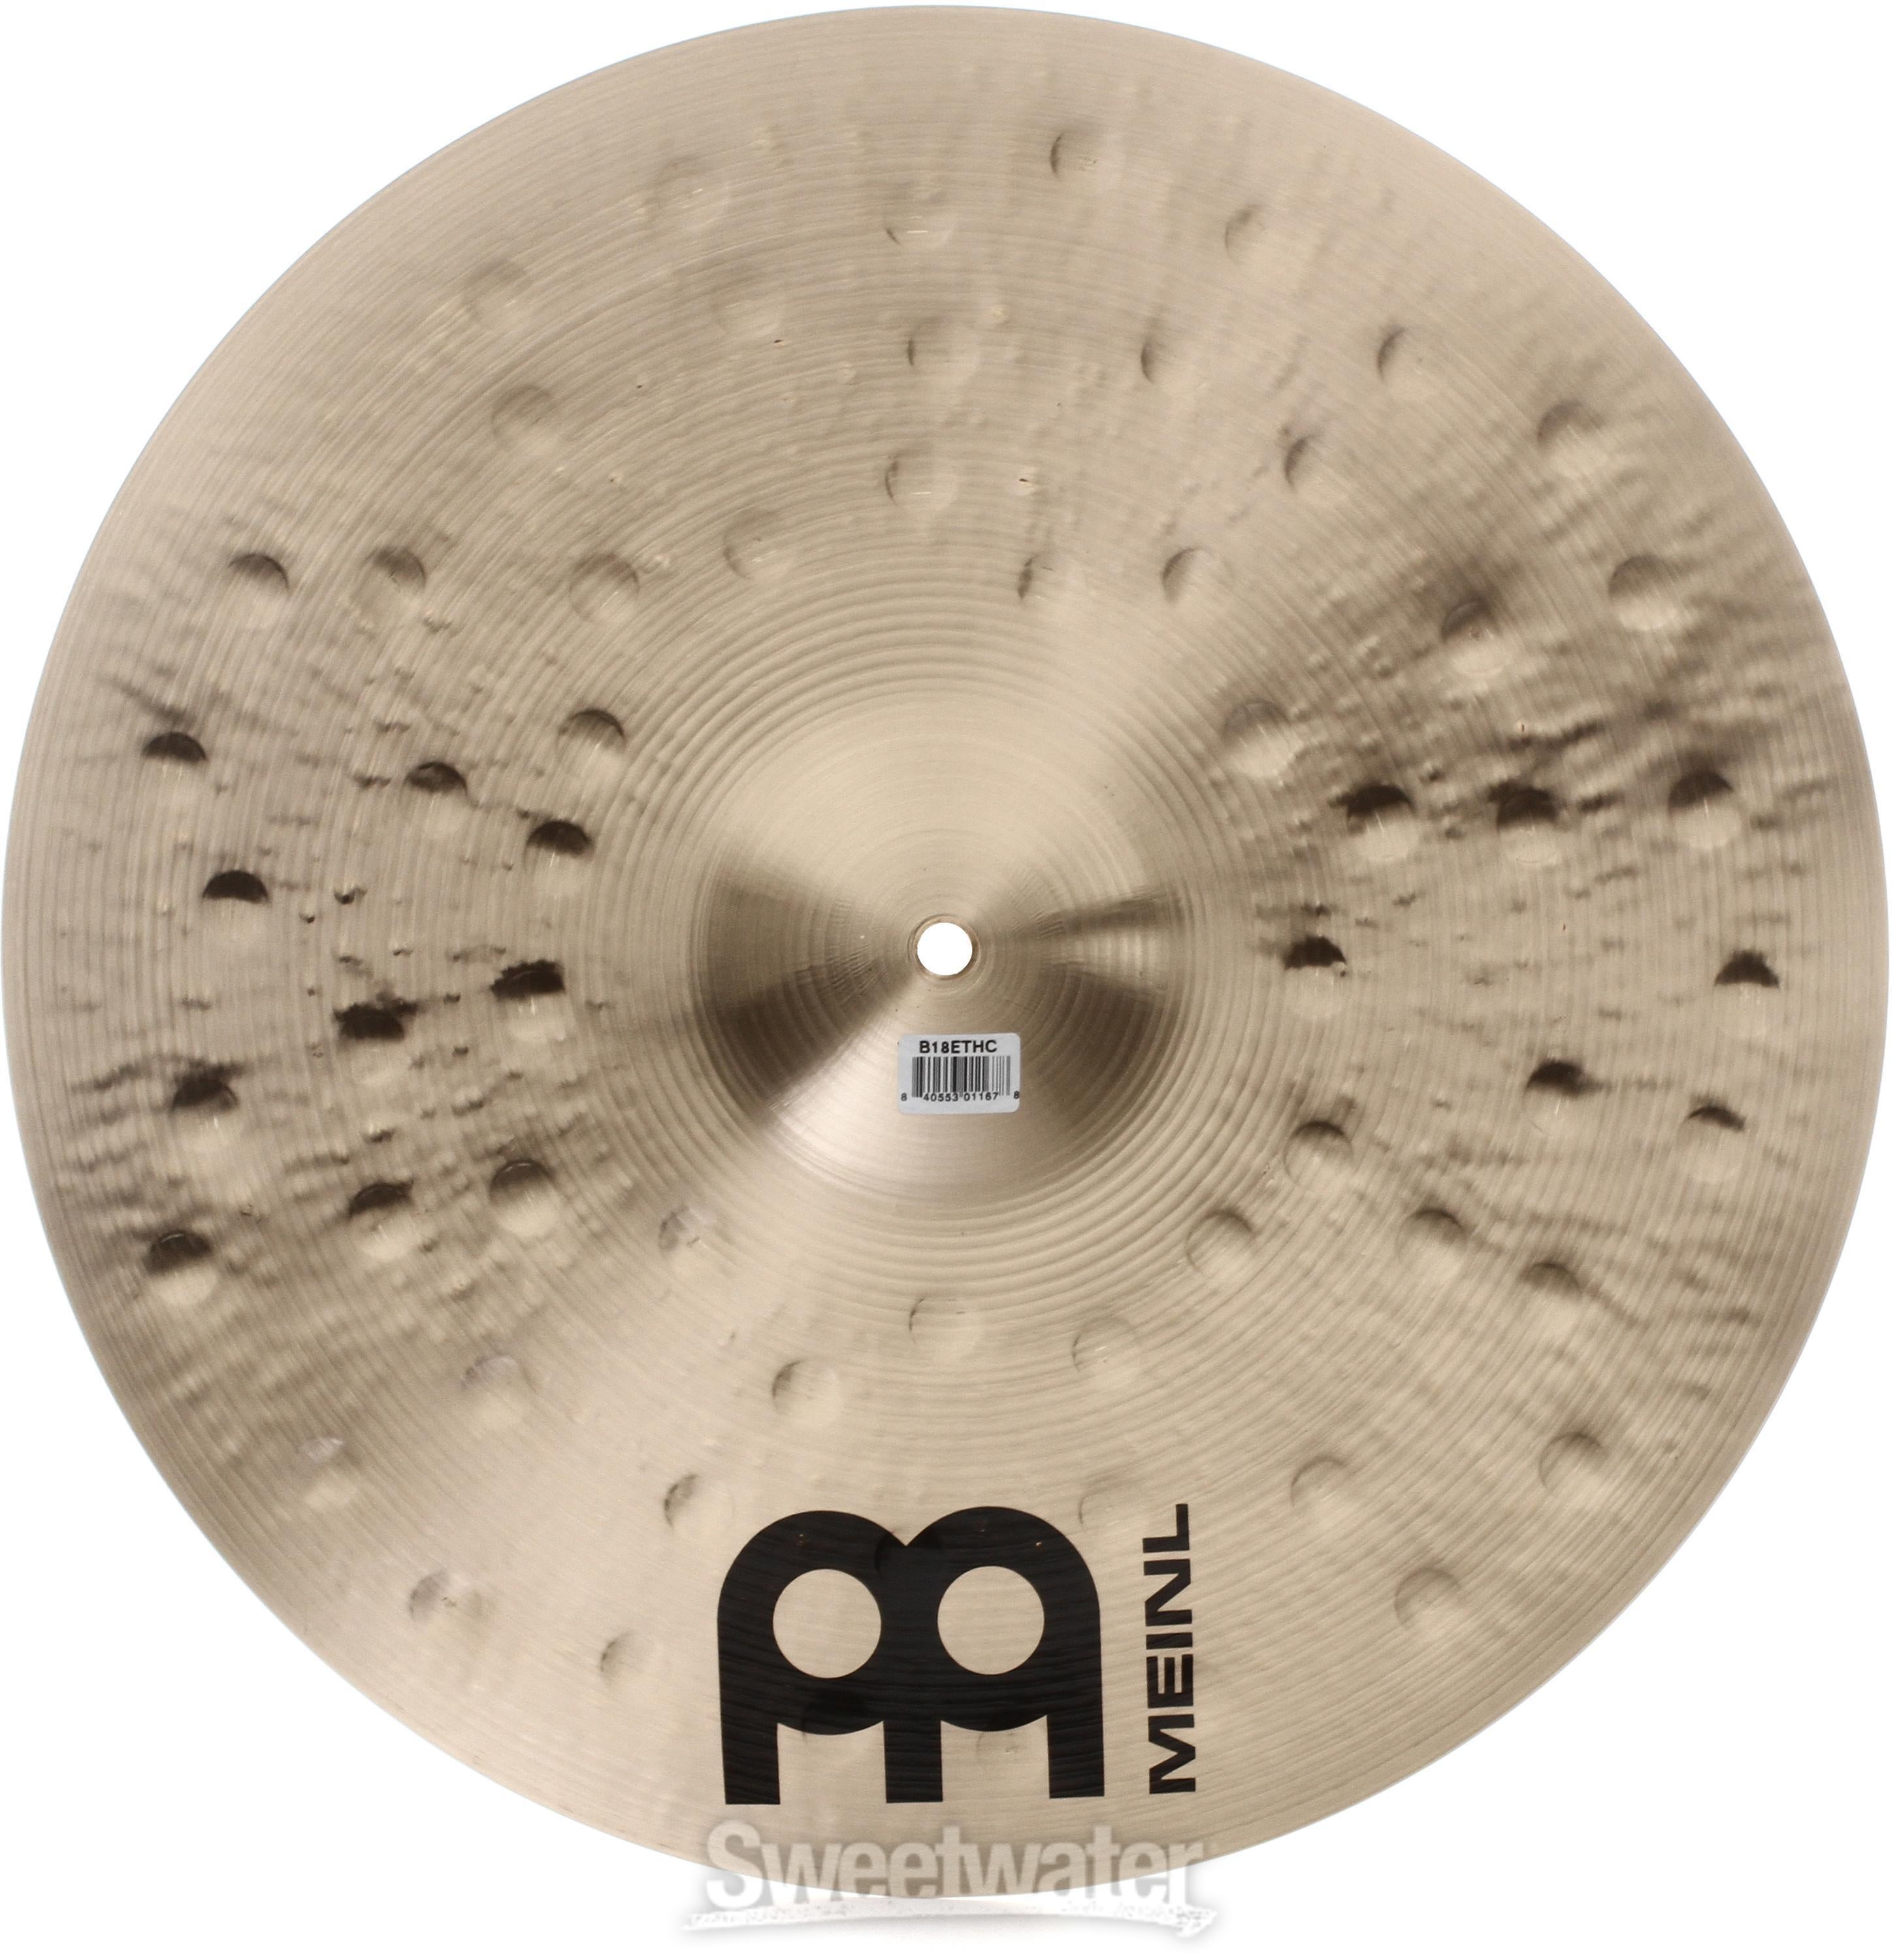 Meinl Cymbals 18 inch Byzance Traditional Extra Thin Hammered Crash Cymbal